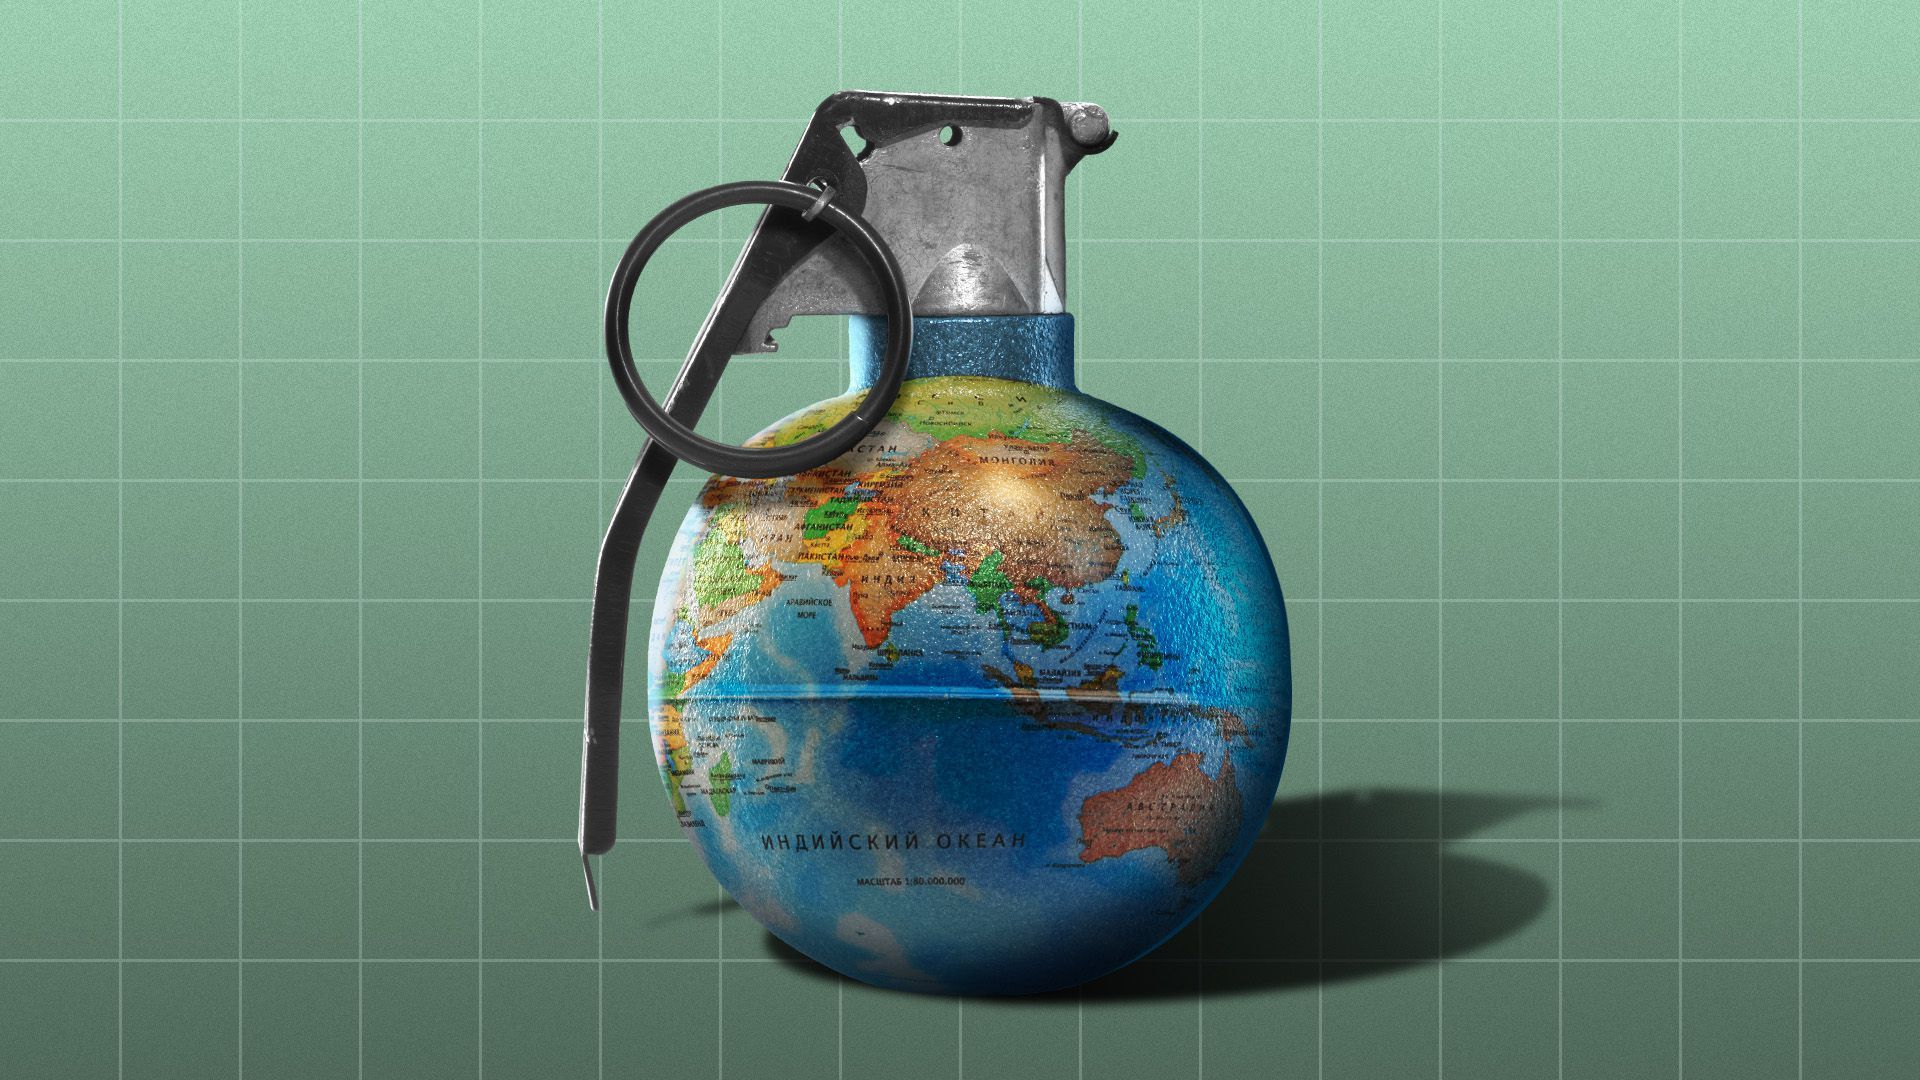 Illustration of a grenade with the world on it.